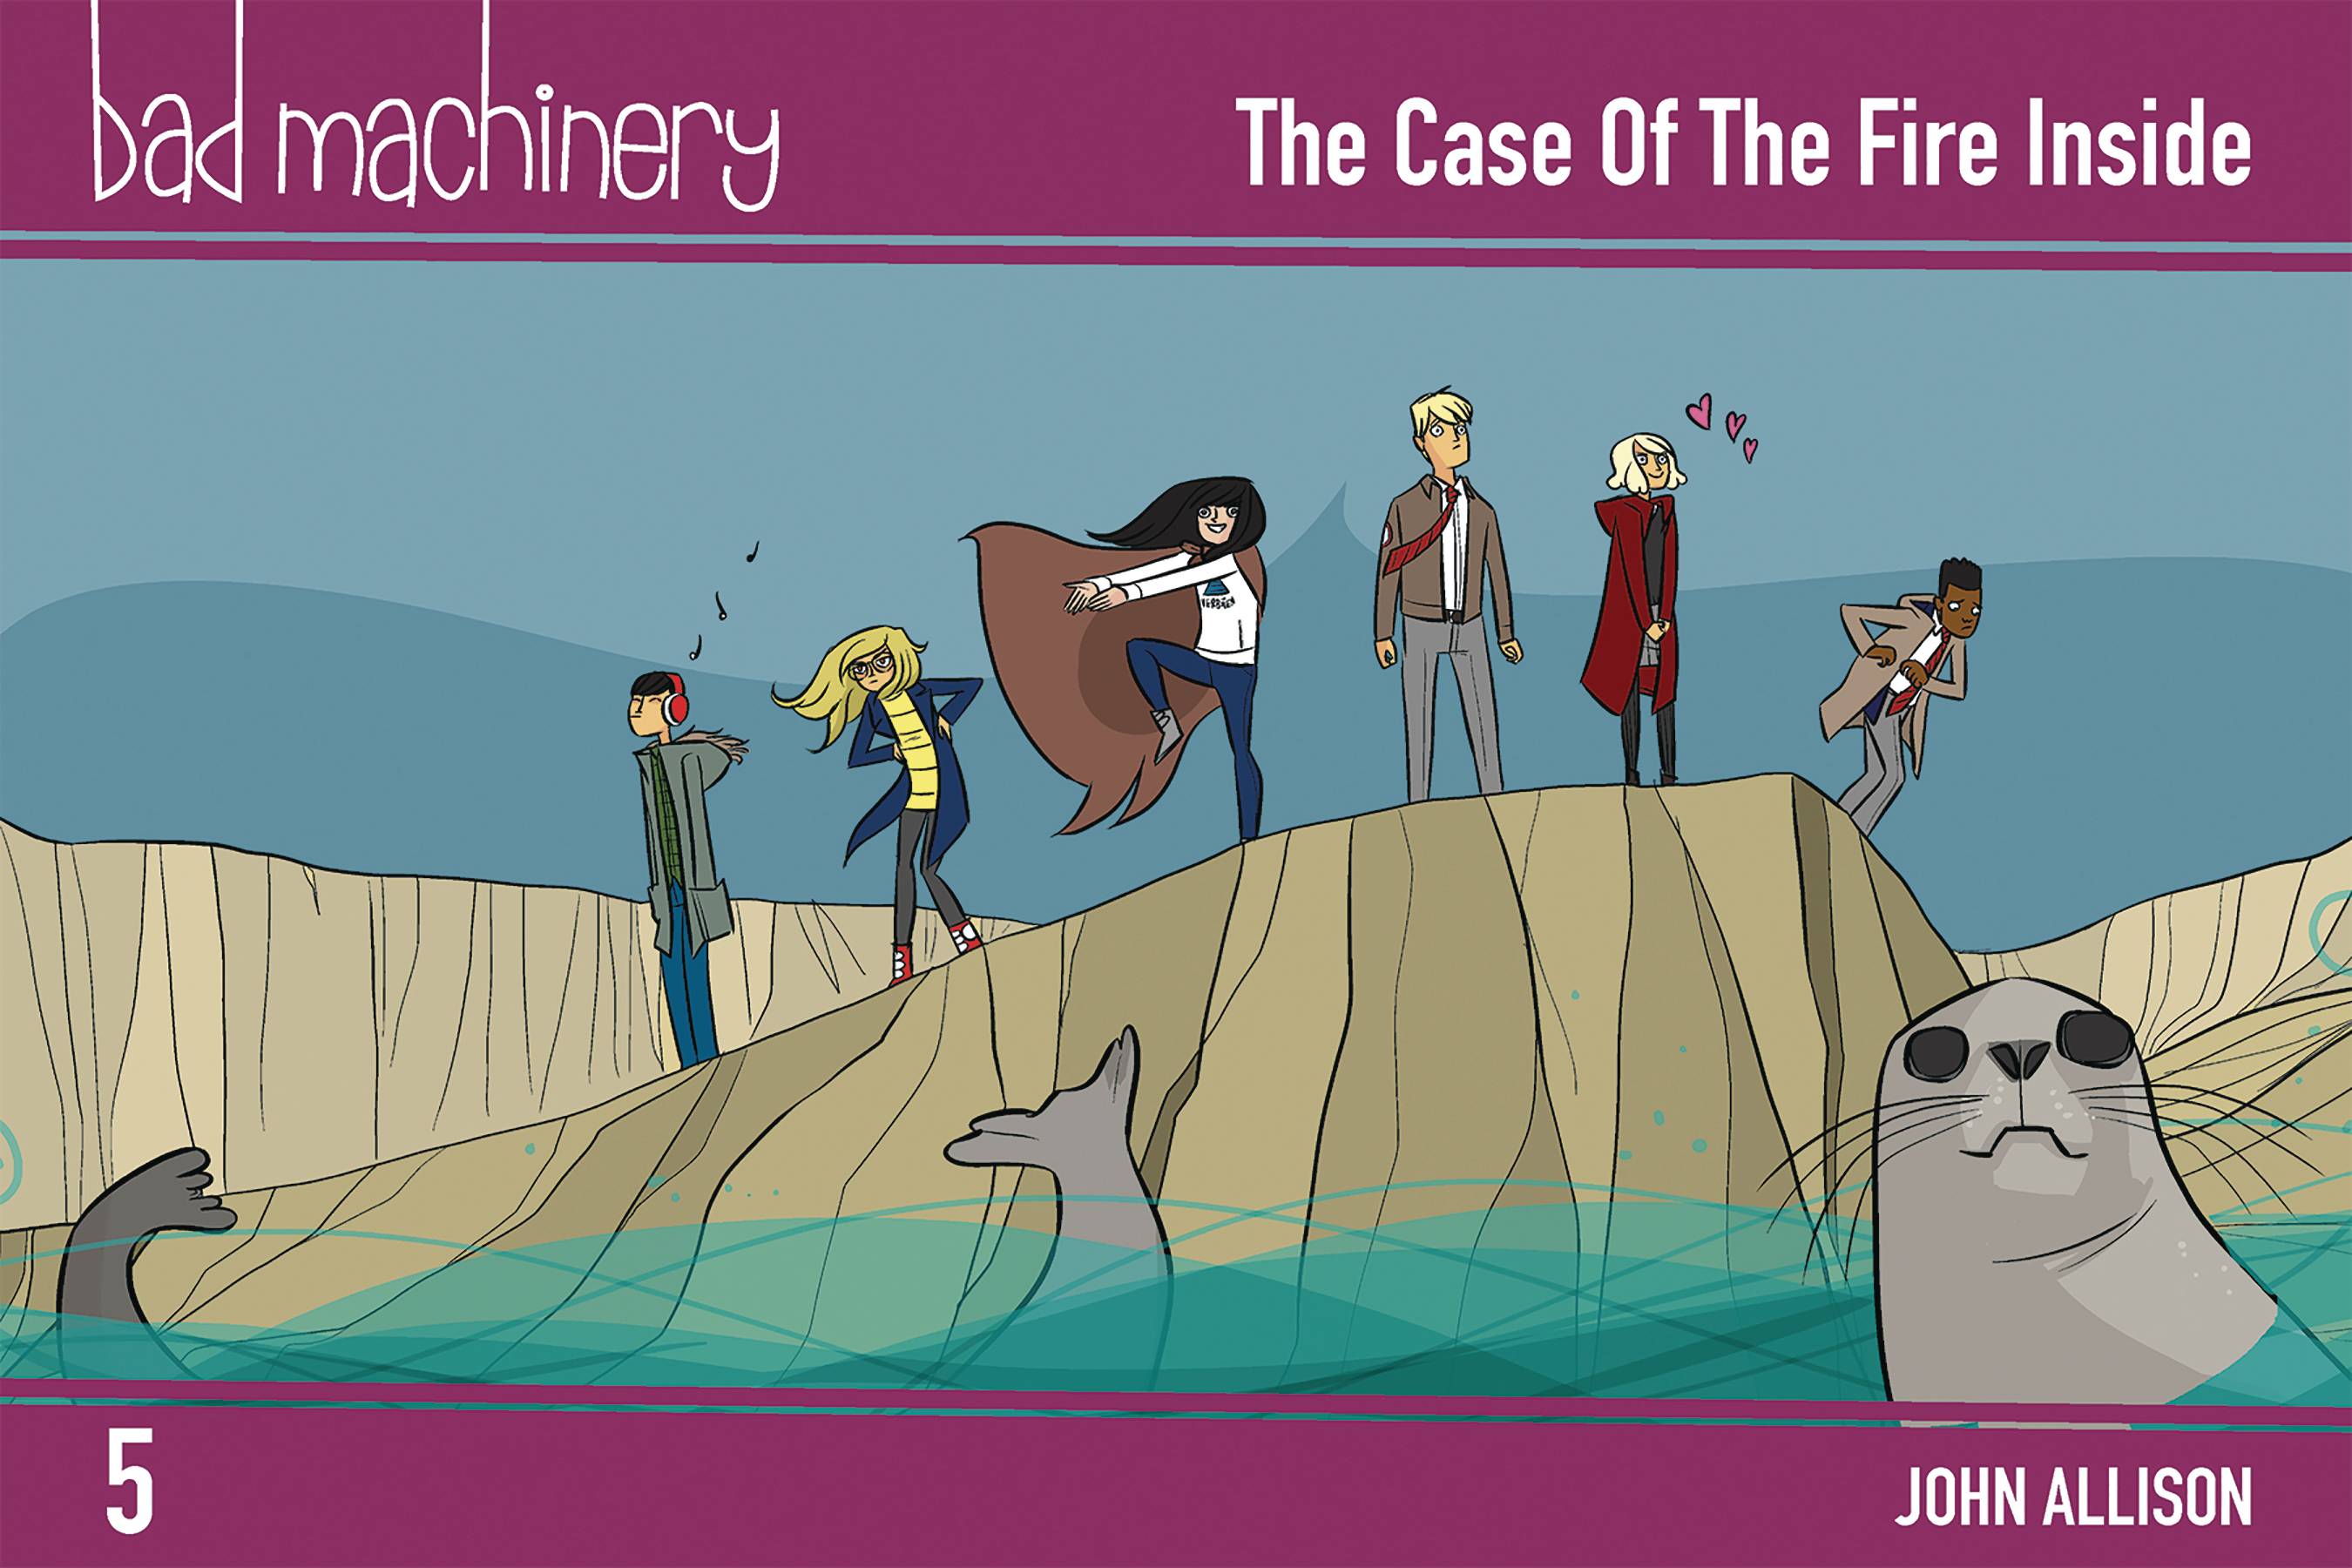 Bad Machinery vol 5: The Case Of The Fire Inside s/c